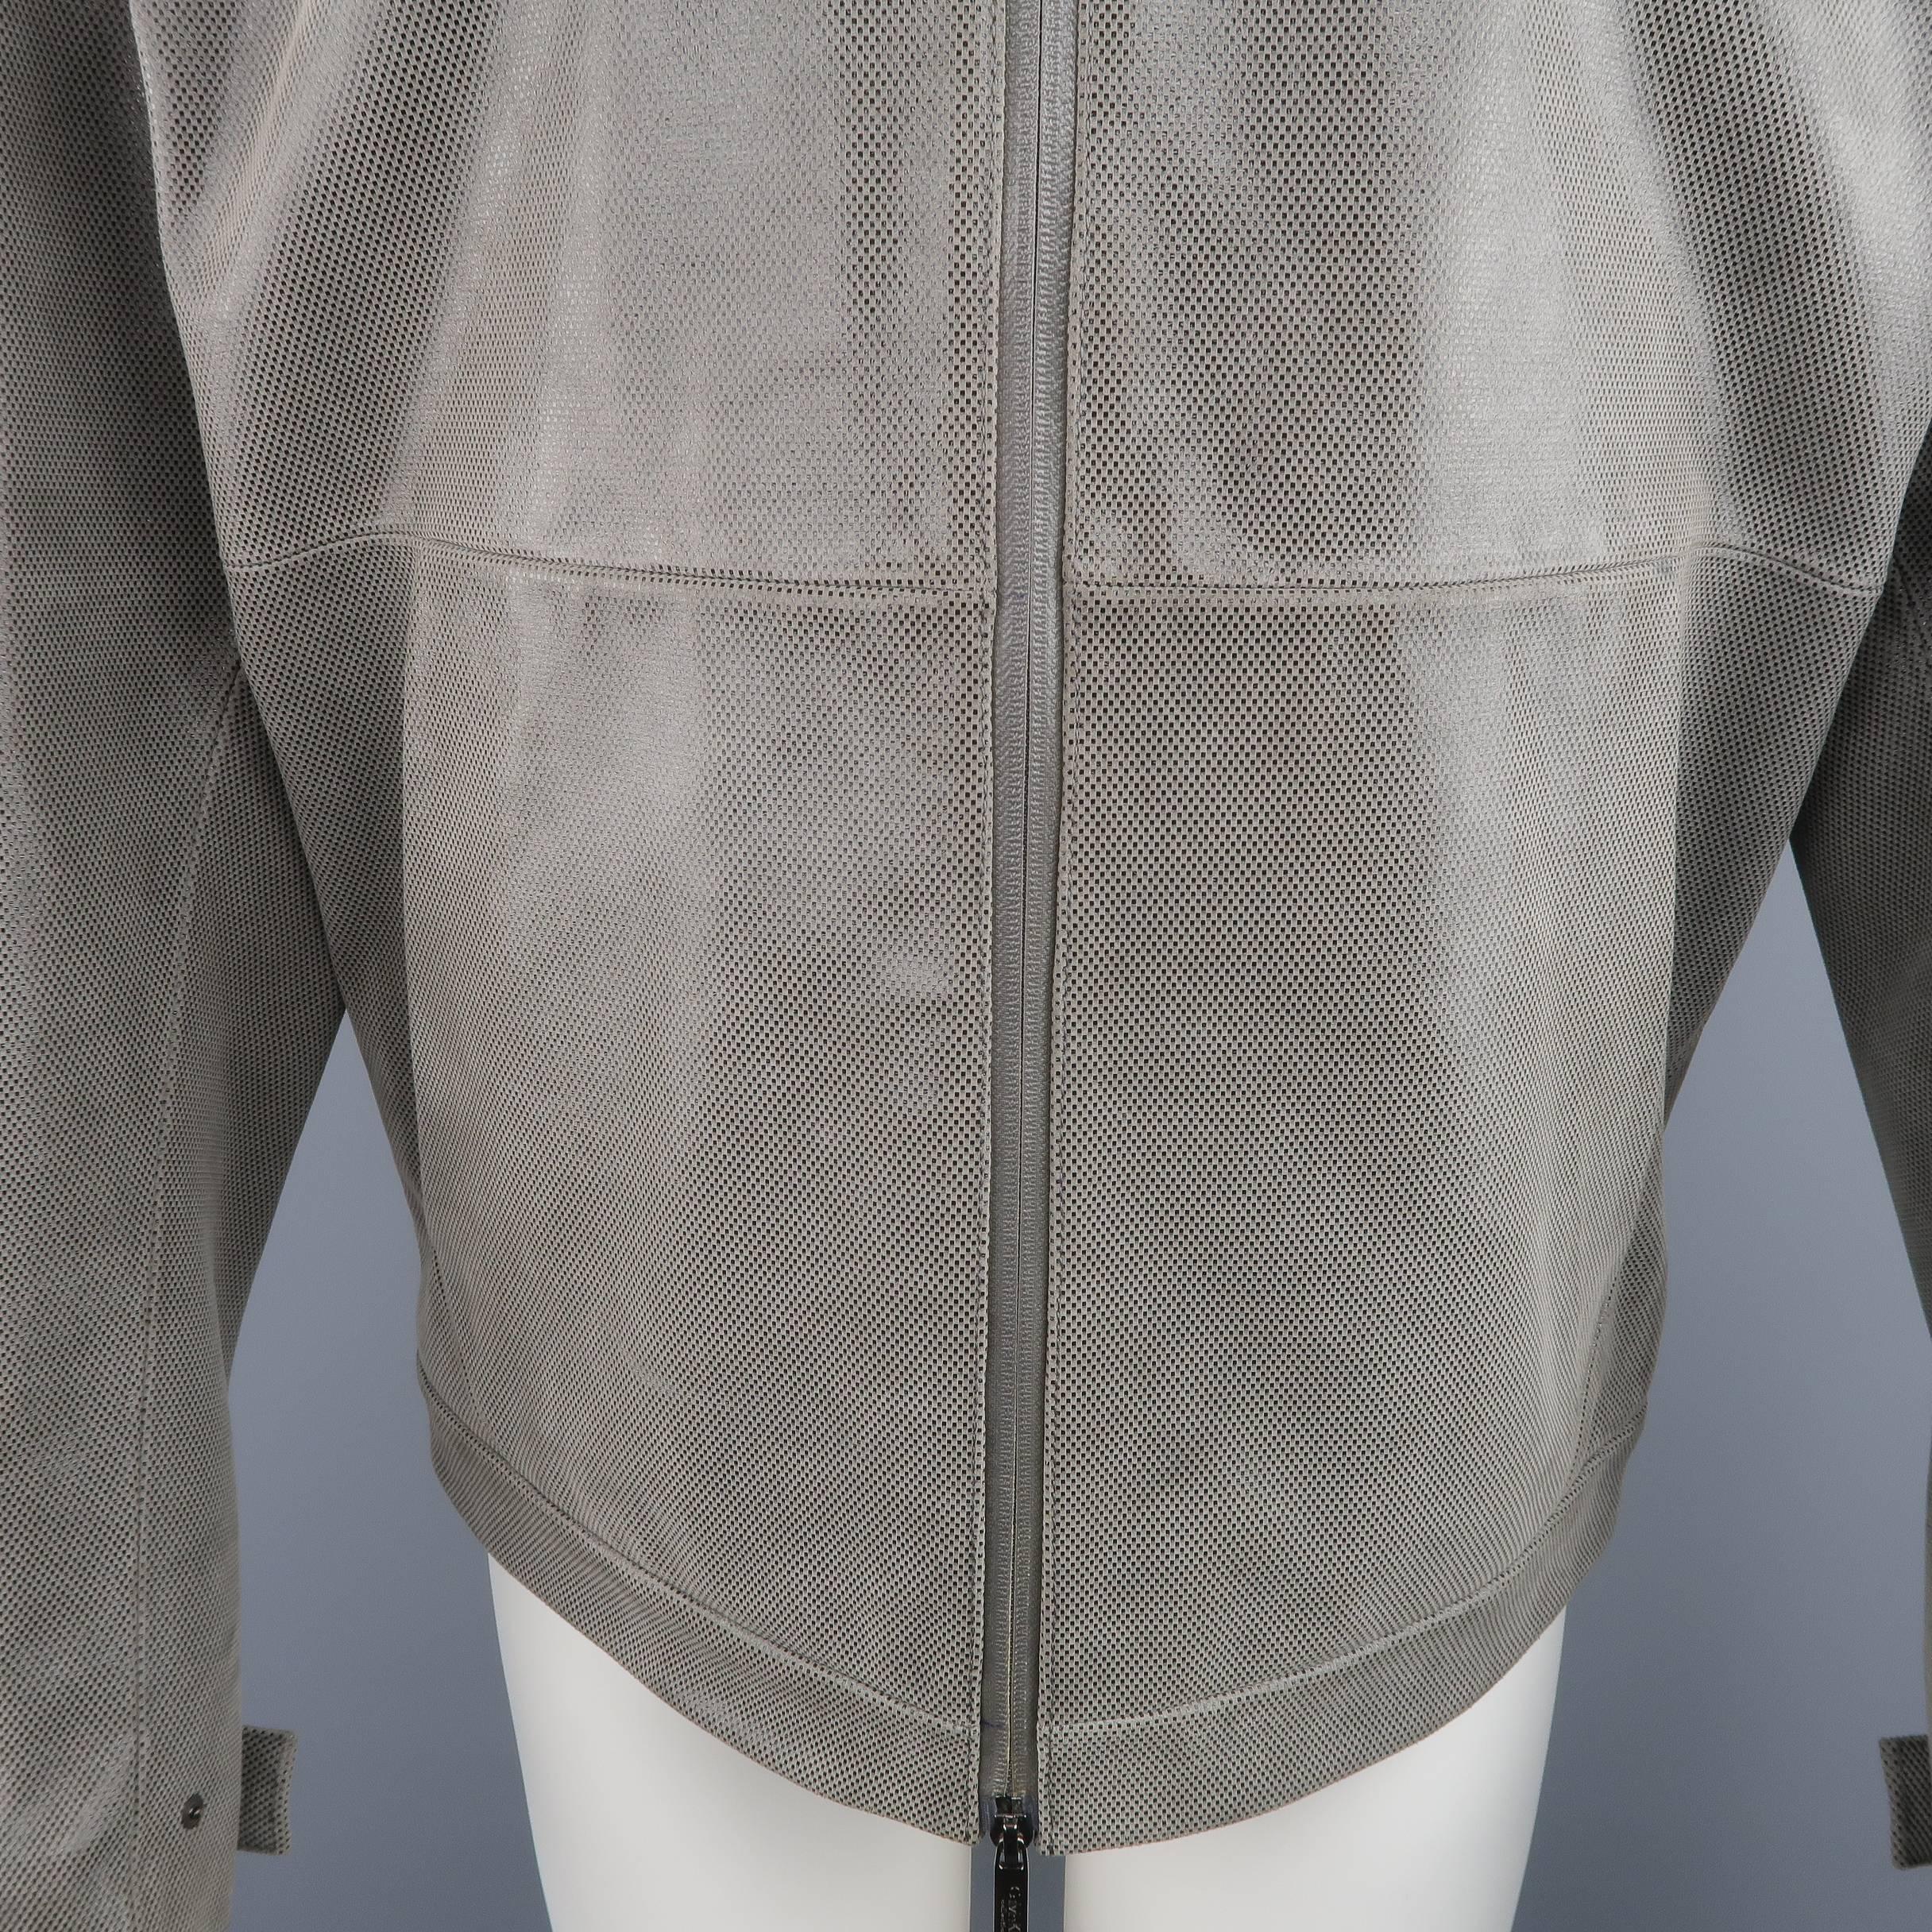 Calvin Klein Collection leather jacket comes in a taupe gray matte sueded leather with all over metallic black micro nailhead print and features a coated double zip front with embossed tabs, pointed collar, slanted pockets, and snap tab cuffs. Made